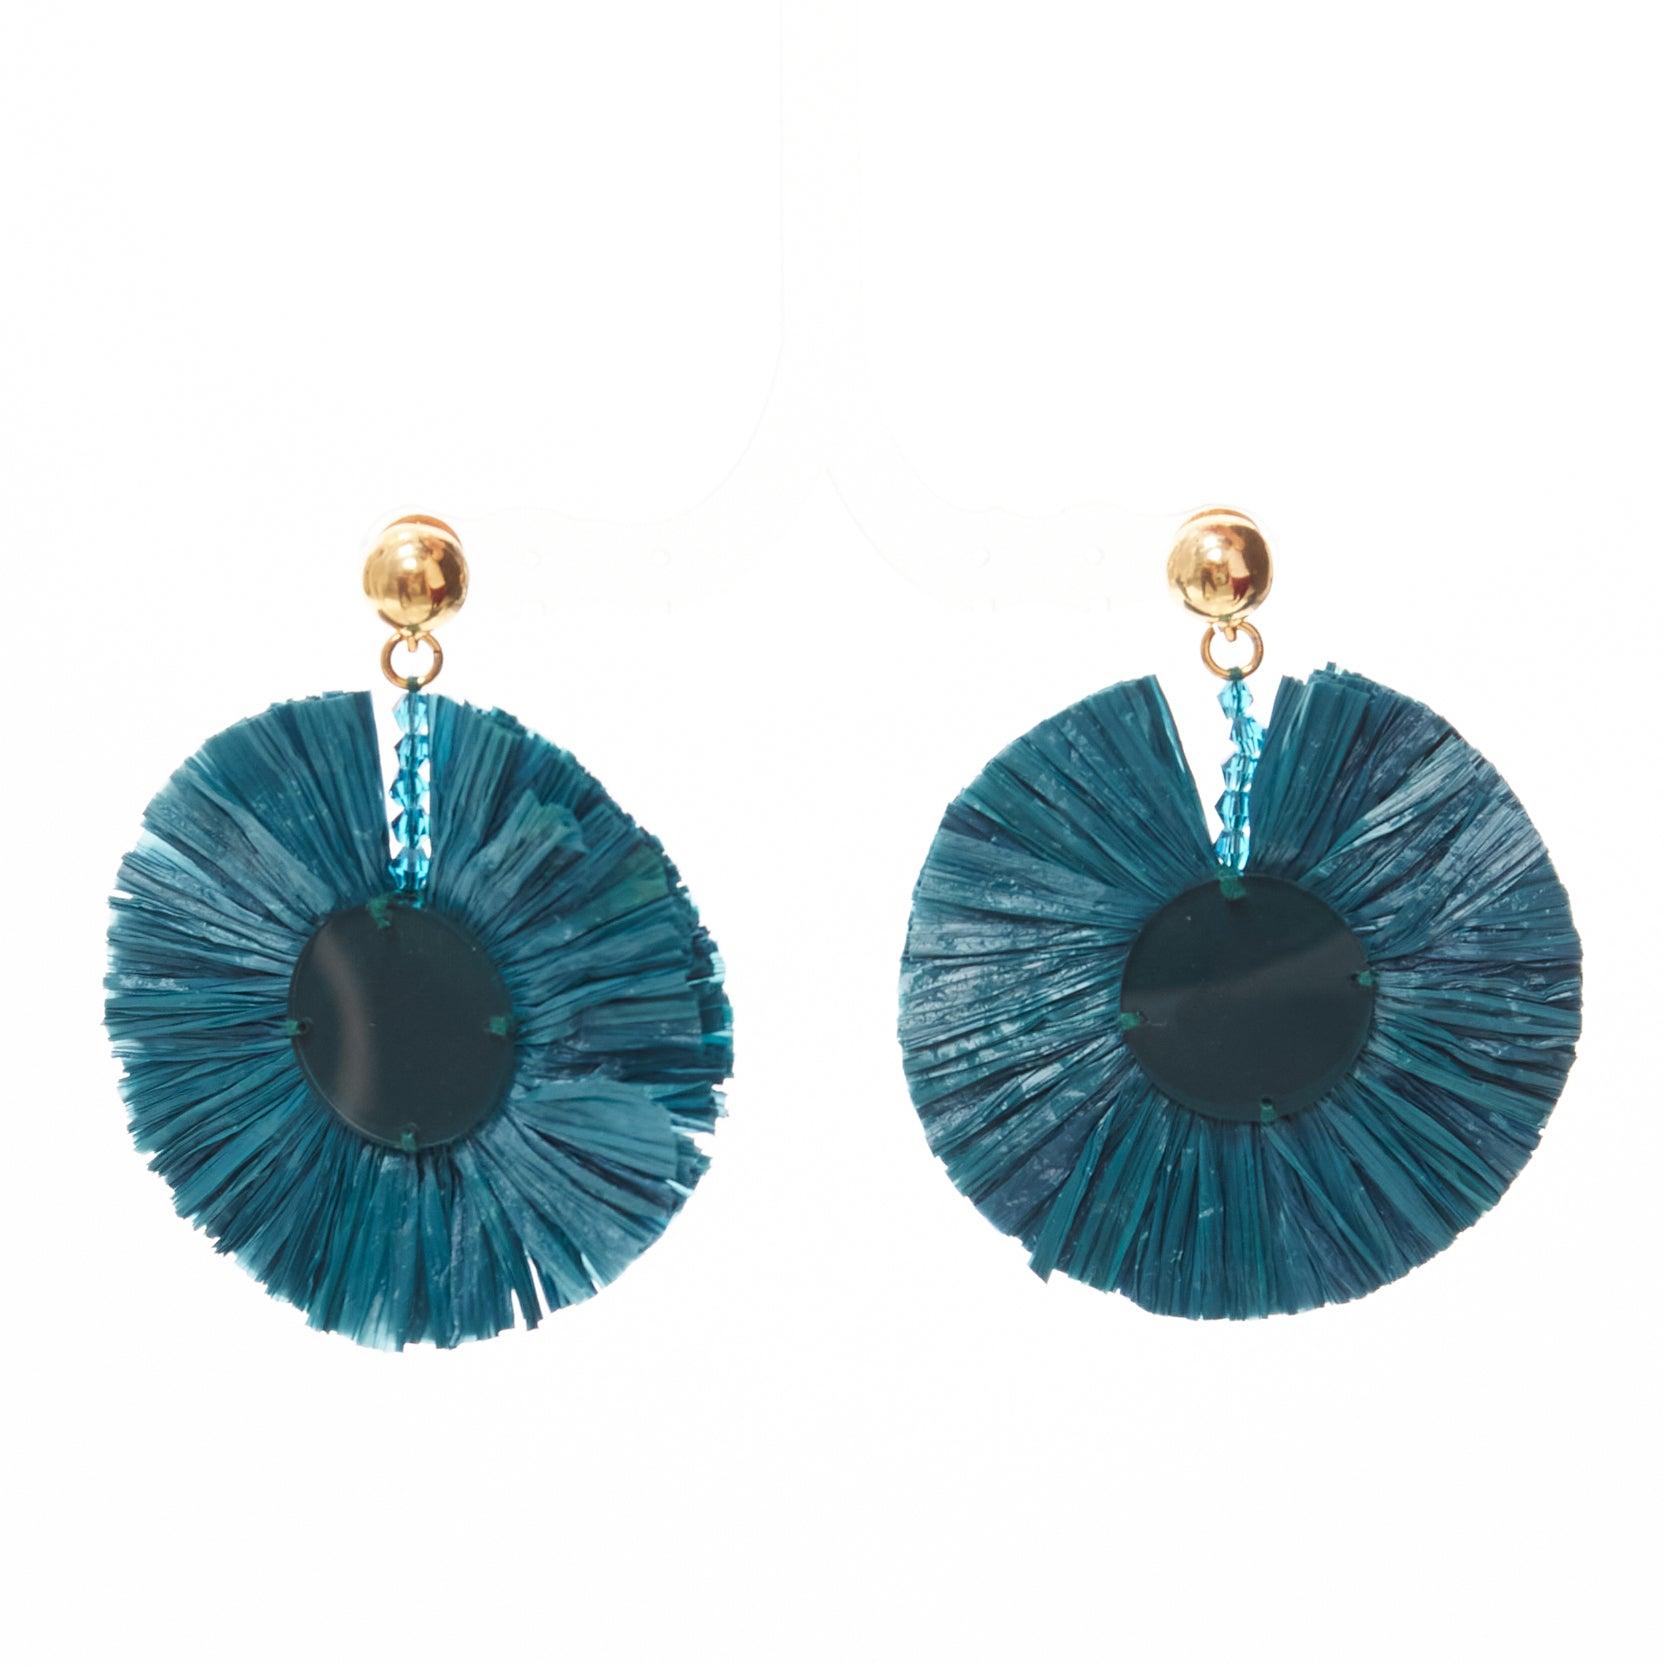 OSCAR DE LA RENTA dark green raffia acrylic plate round pin earrings
Reference: AAWC/A01236
Brand: Oscar de la Renta
Material: Raffia
Color: Green, Gold
Pattern: Solid
Closure: Pin
Lining: Gold Metal

CONDITION:
Condition: Good, this item was